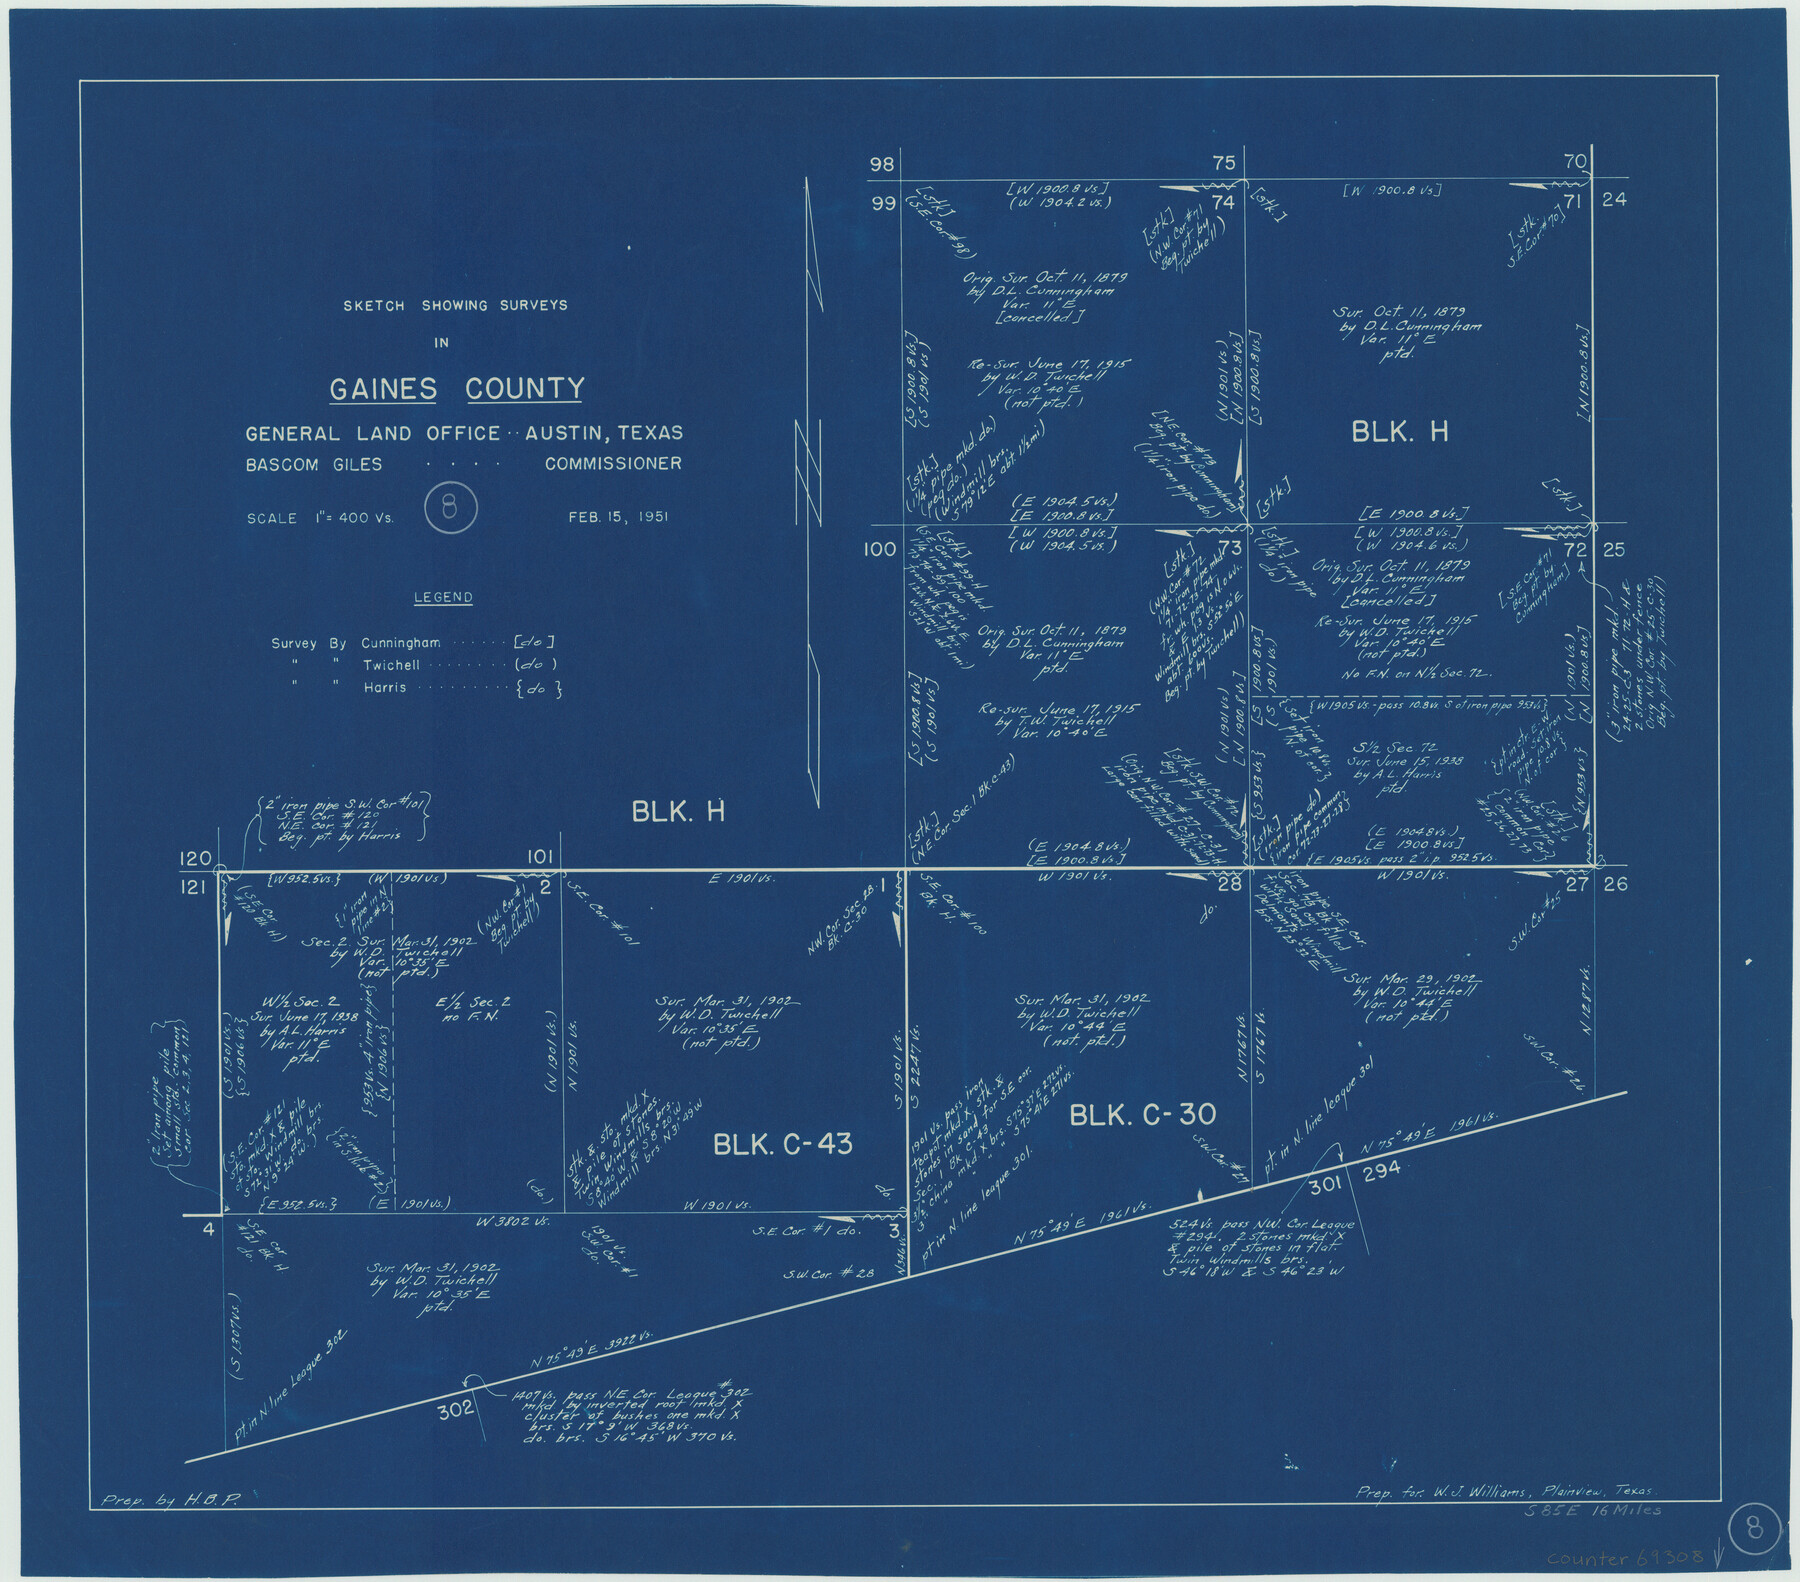 69308, Gaines County Working Sketch 8, General Map Collection